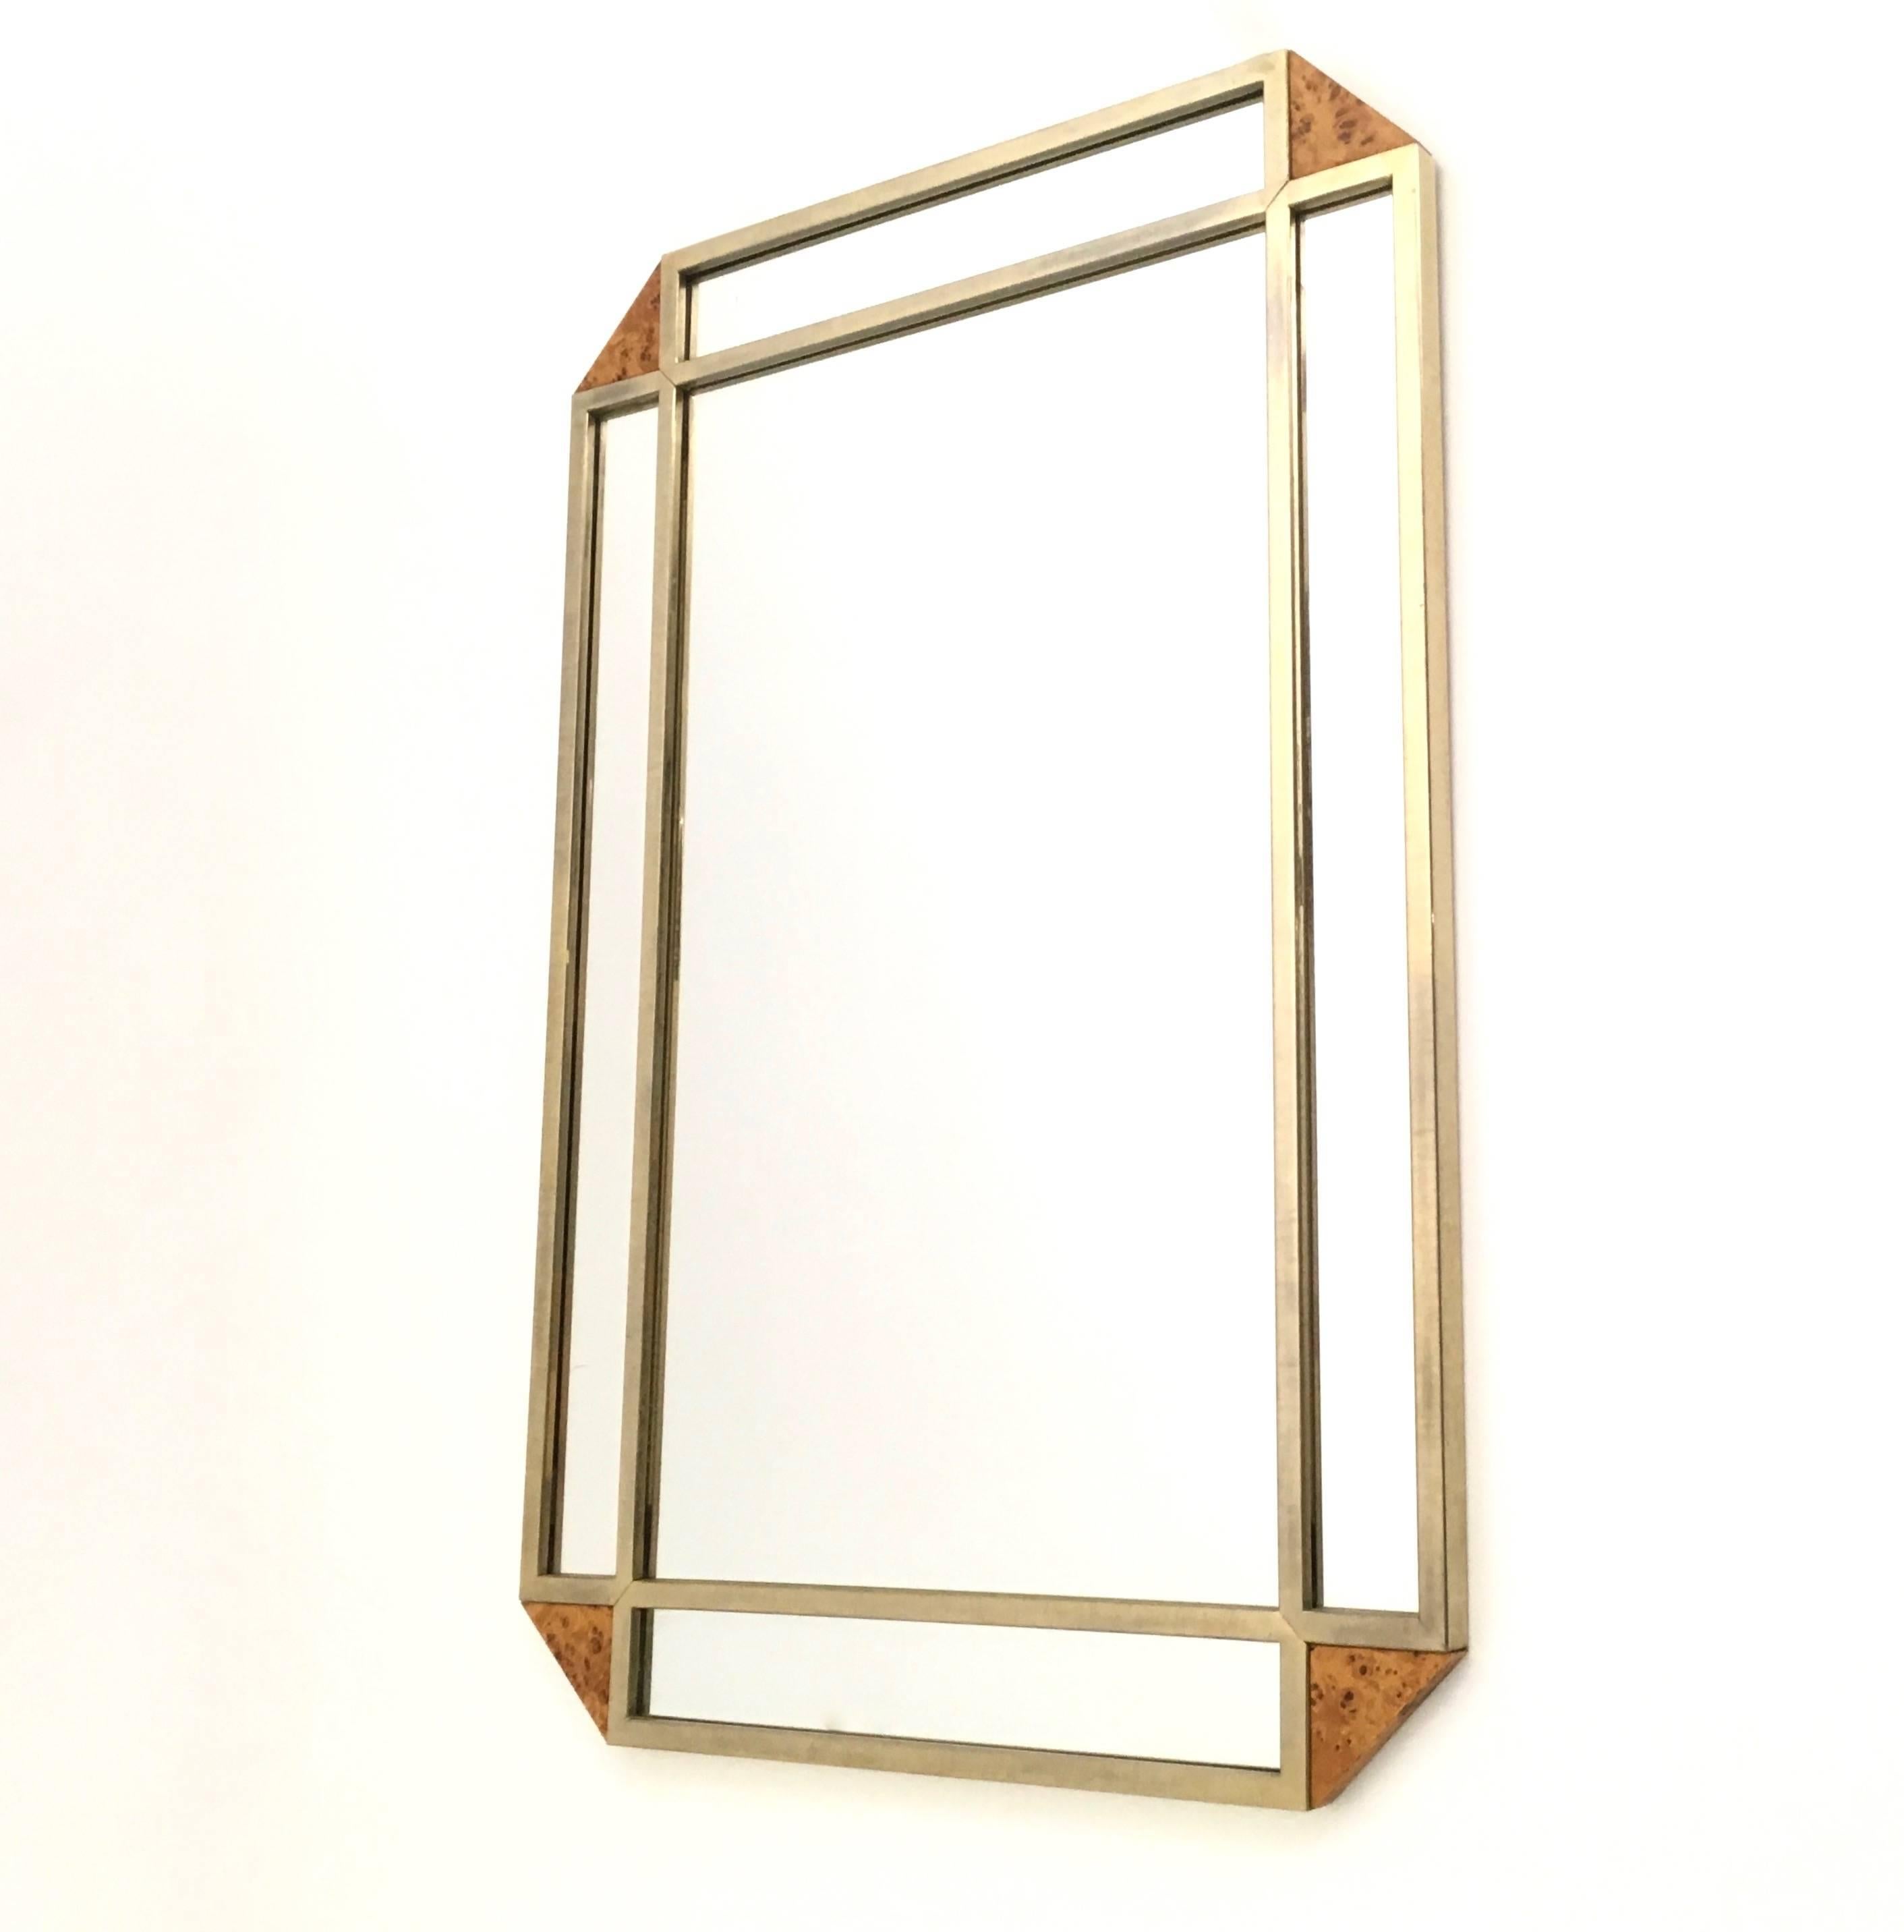 Made in Italy. 
This rectangular wall mirror features a steel frame and canted blond root corners.
It may show slight traces of use since it's vintage, but it can be considered as in very good original condition and ready to become a piece in a